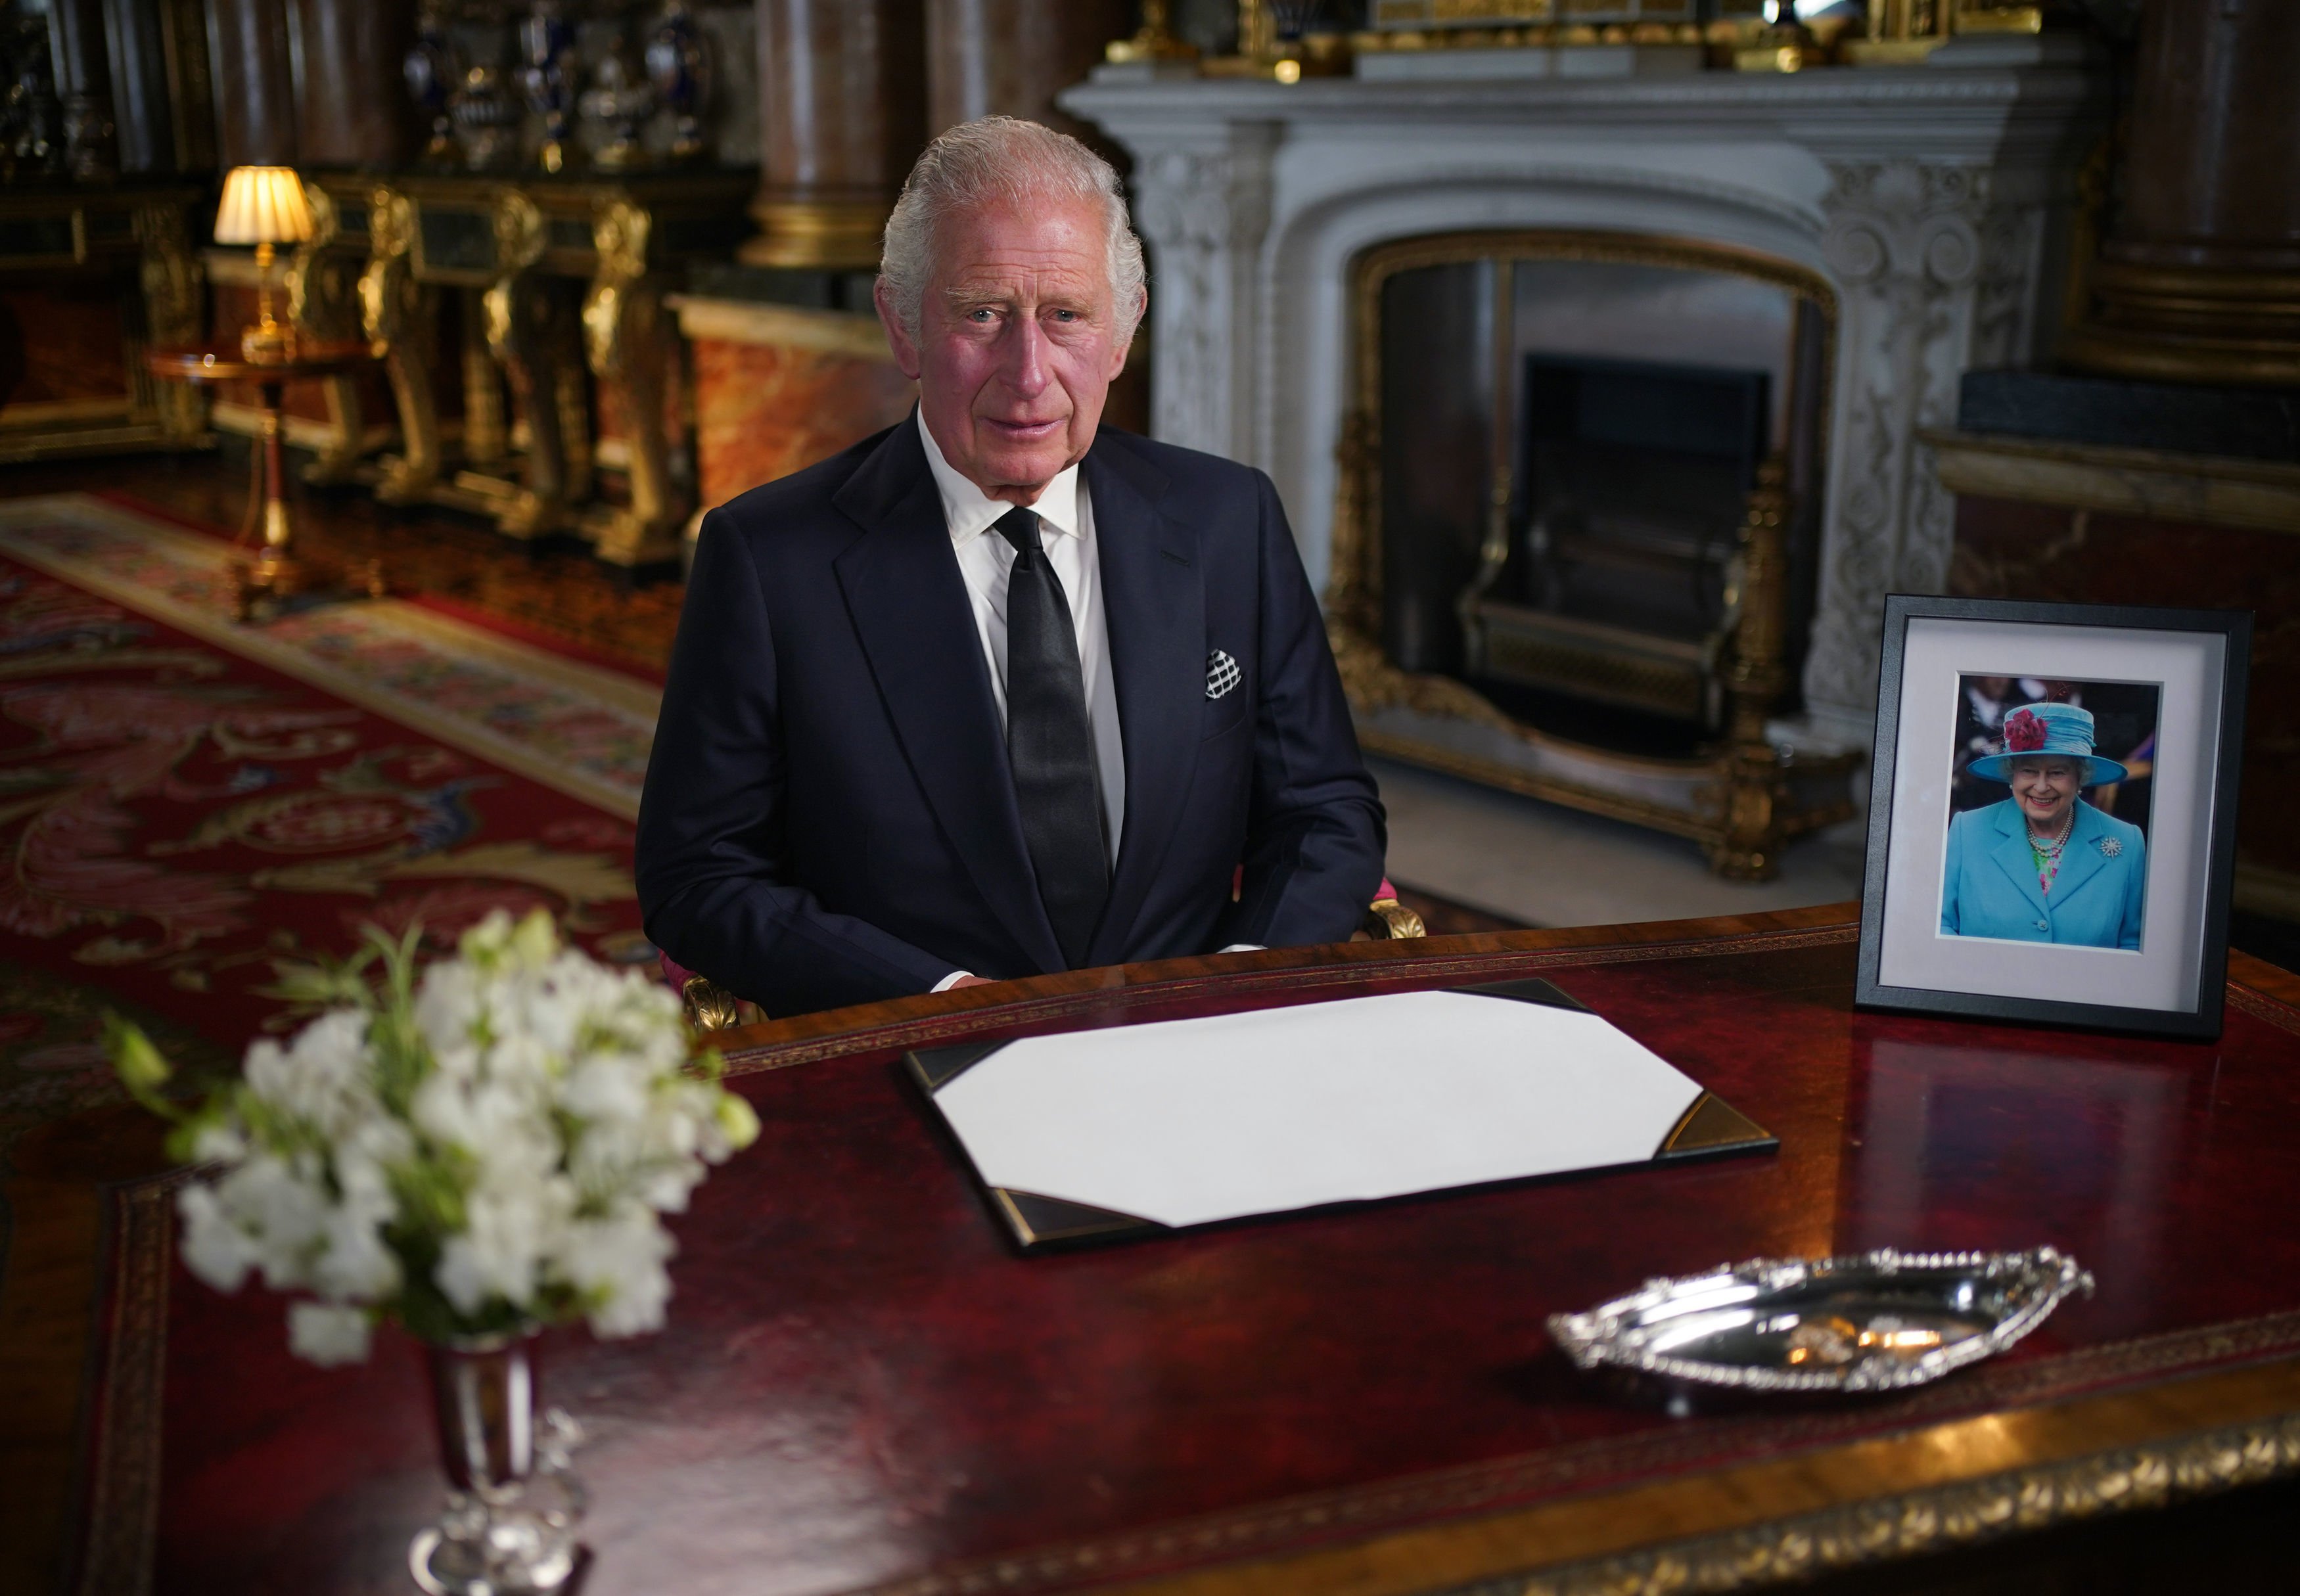 King Charles III delivered his address to the nation and the Commonwealth from Buckingham Palace following the death of Queen Elizabeth II on Thursday, September 8, in Balmoral, on September 9, 2022, in London, England. | Source: Getty Images